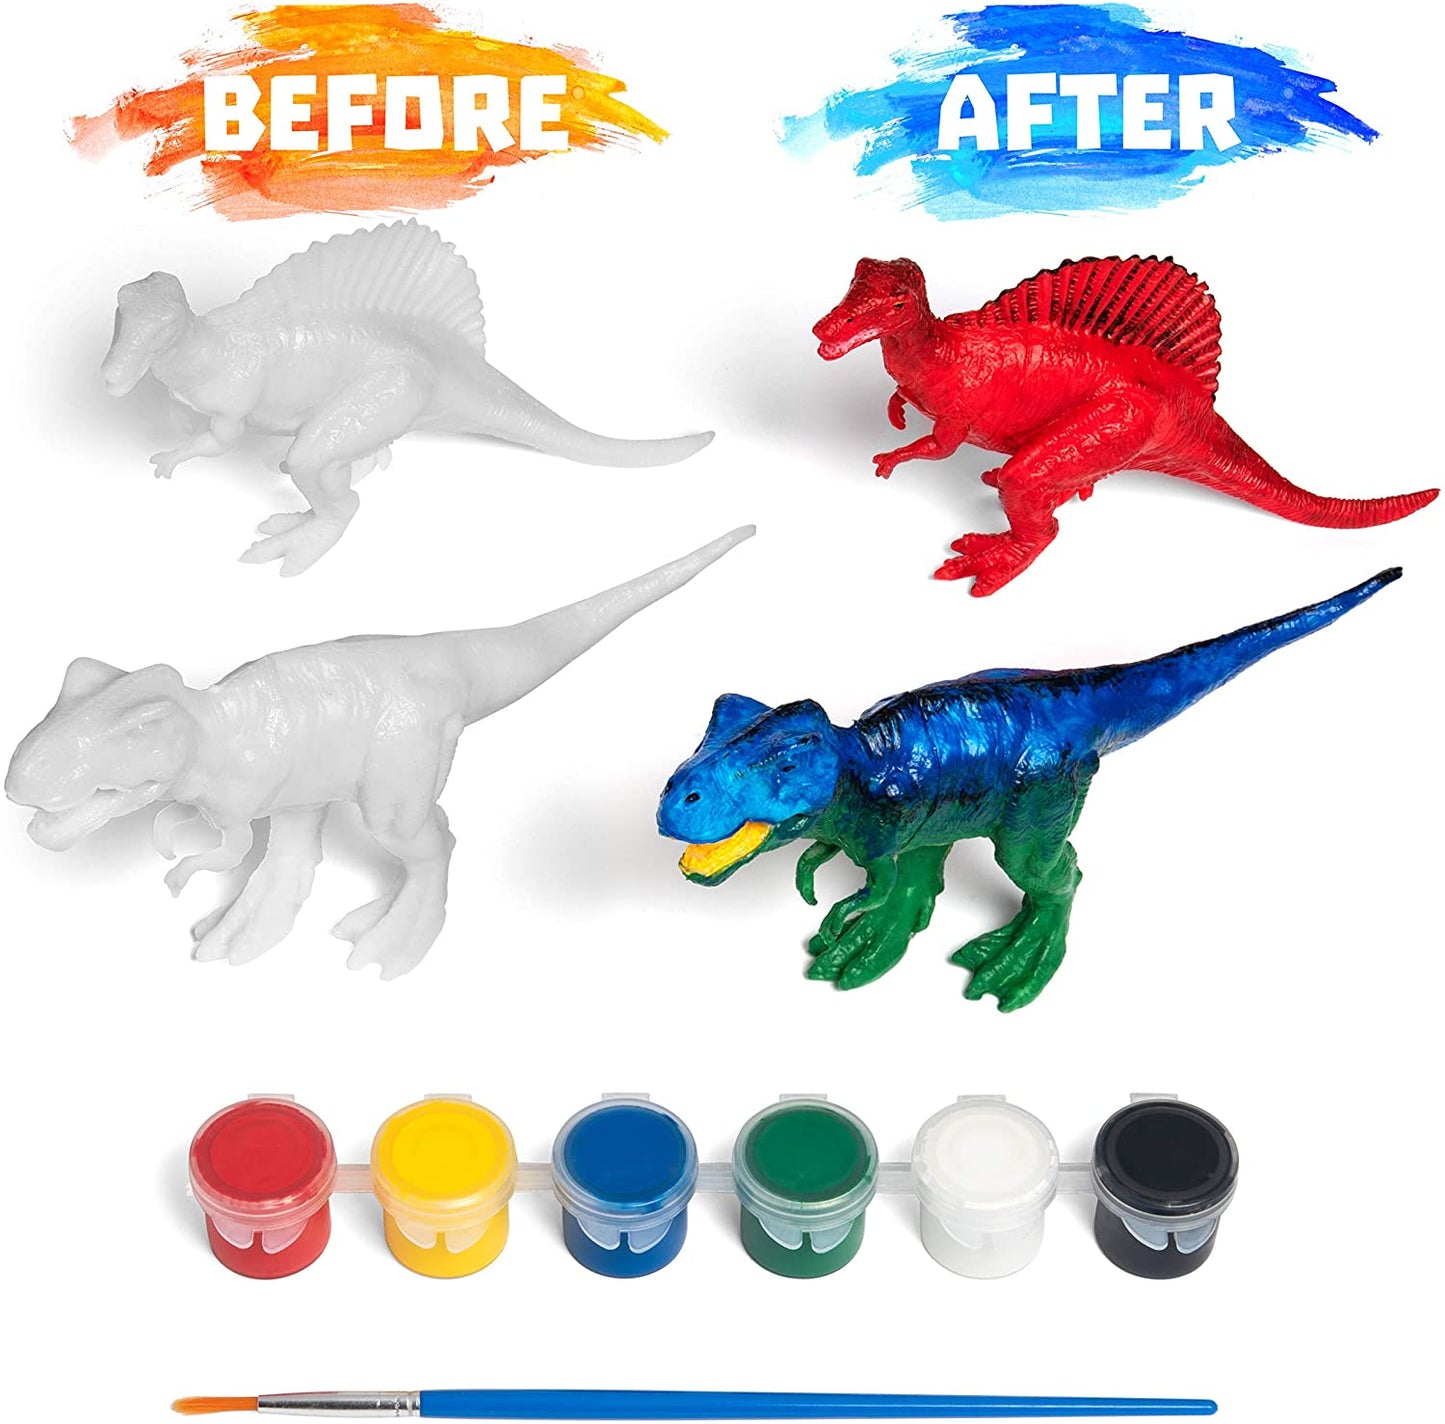 STEM.org Dinosaur Painting Kit for Kids with Dino Trivia-Dinosaur Crafts for Kids Ages 3-5 + w/ 2T-Rex Dinosaur Set - Screen Free, Educational Dinosaur Gifts for Boys, Dino Art Projects for Kids 4-6